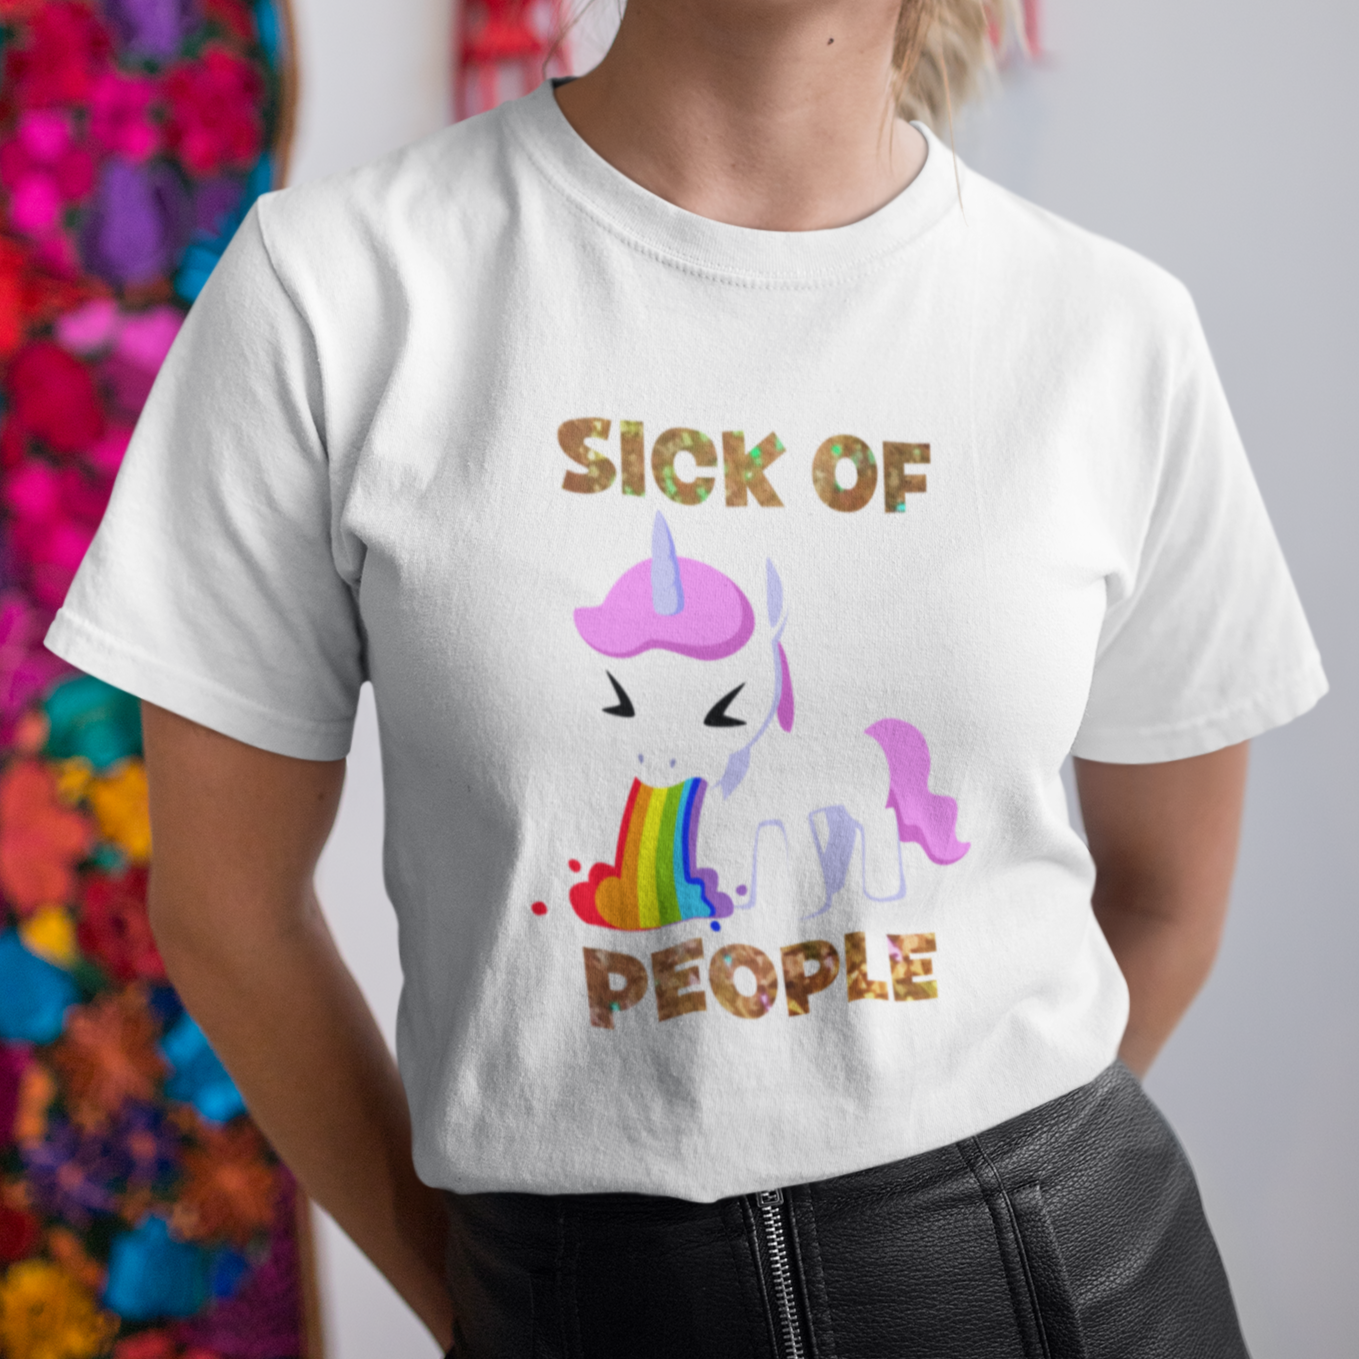 Sick of people or custom words t-shirt summer clothing